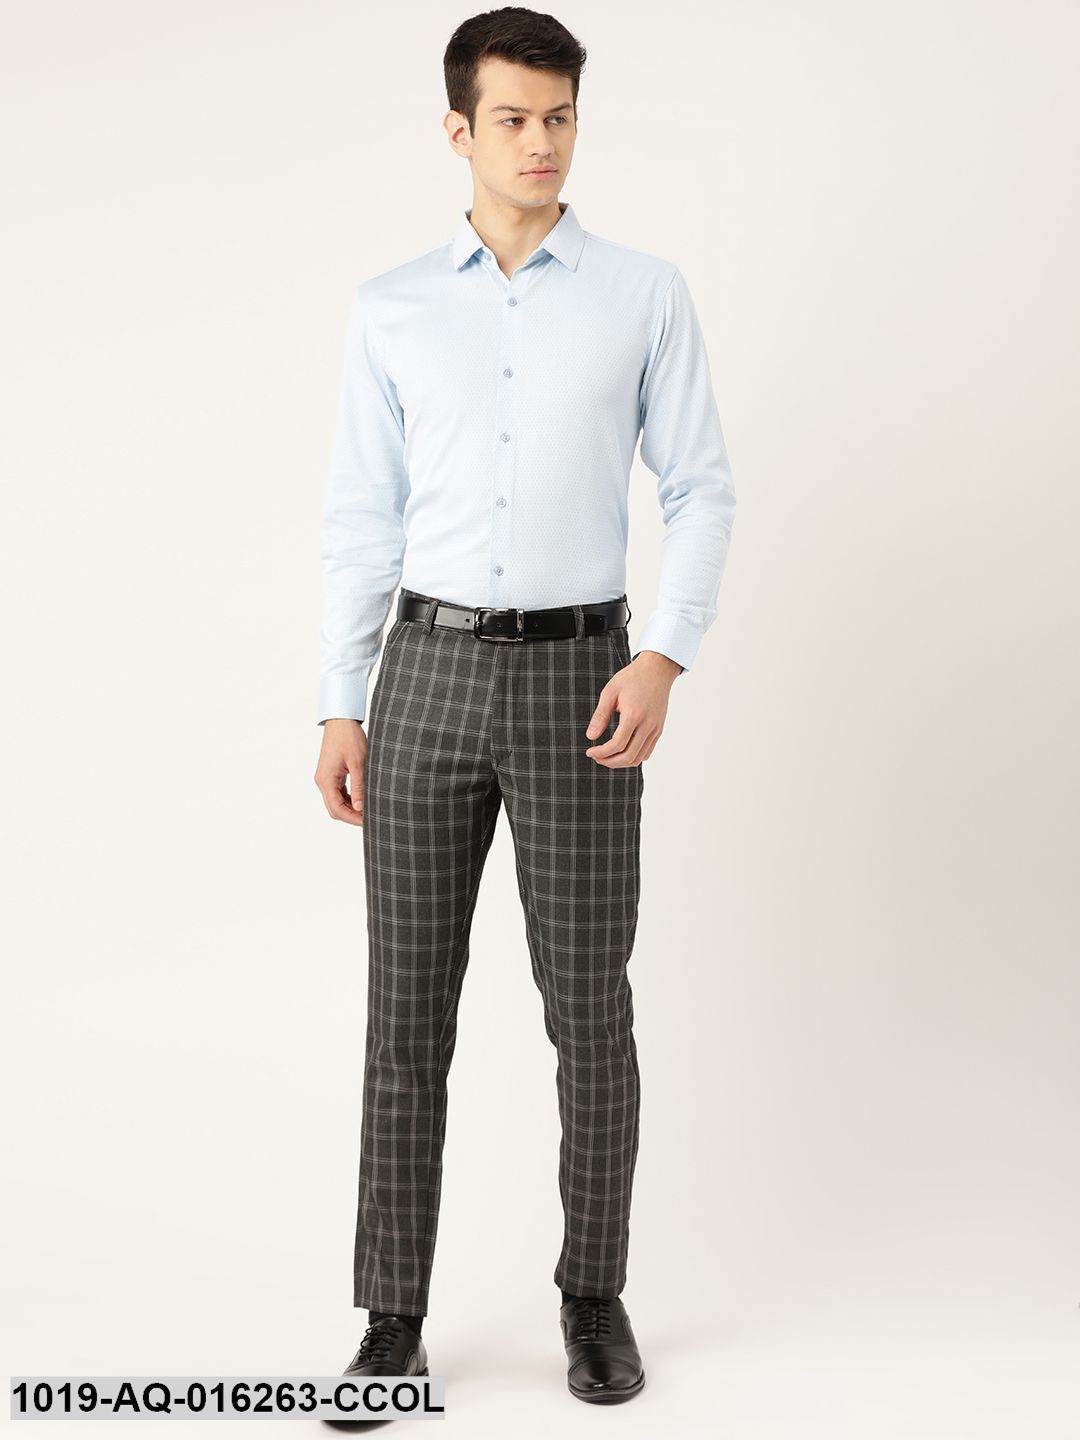 Men's Cotton Blend Charcoal Grey & Grey Checked Formal Trousers - Sojanya